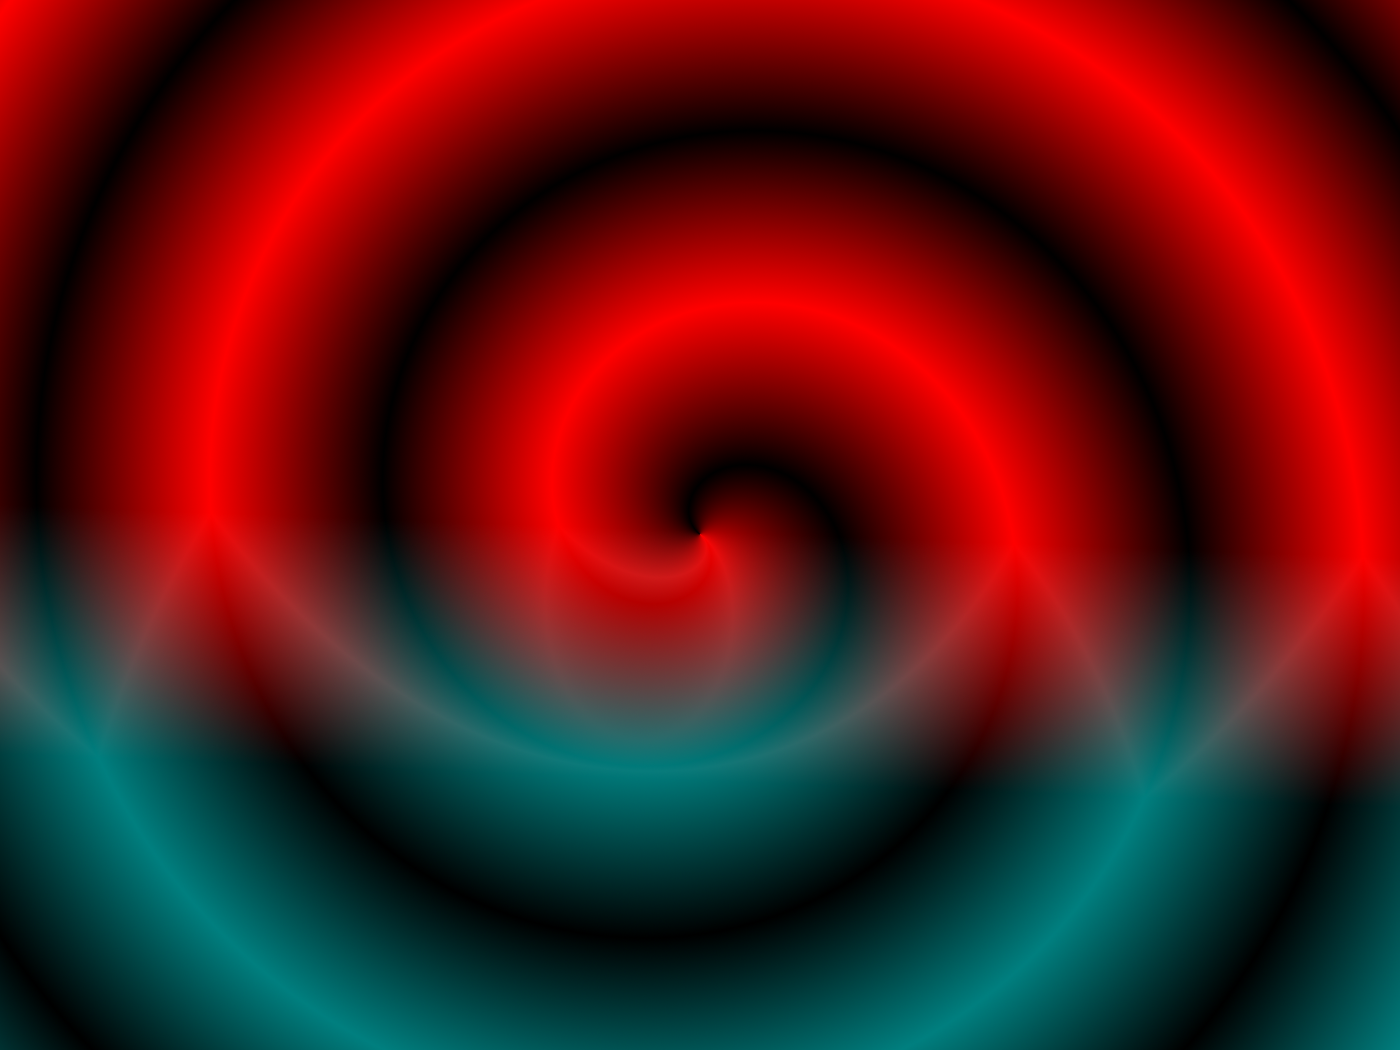 a red and green spiral